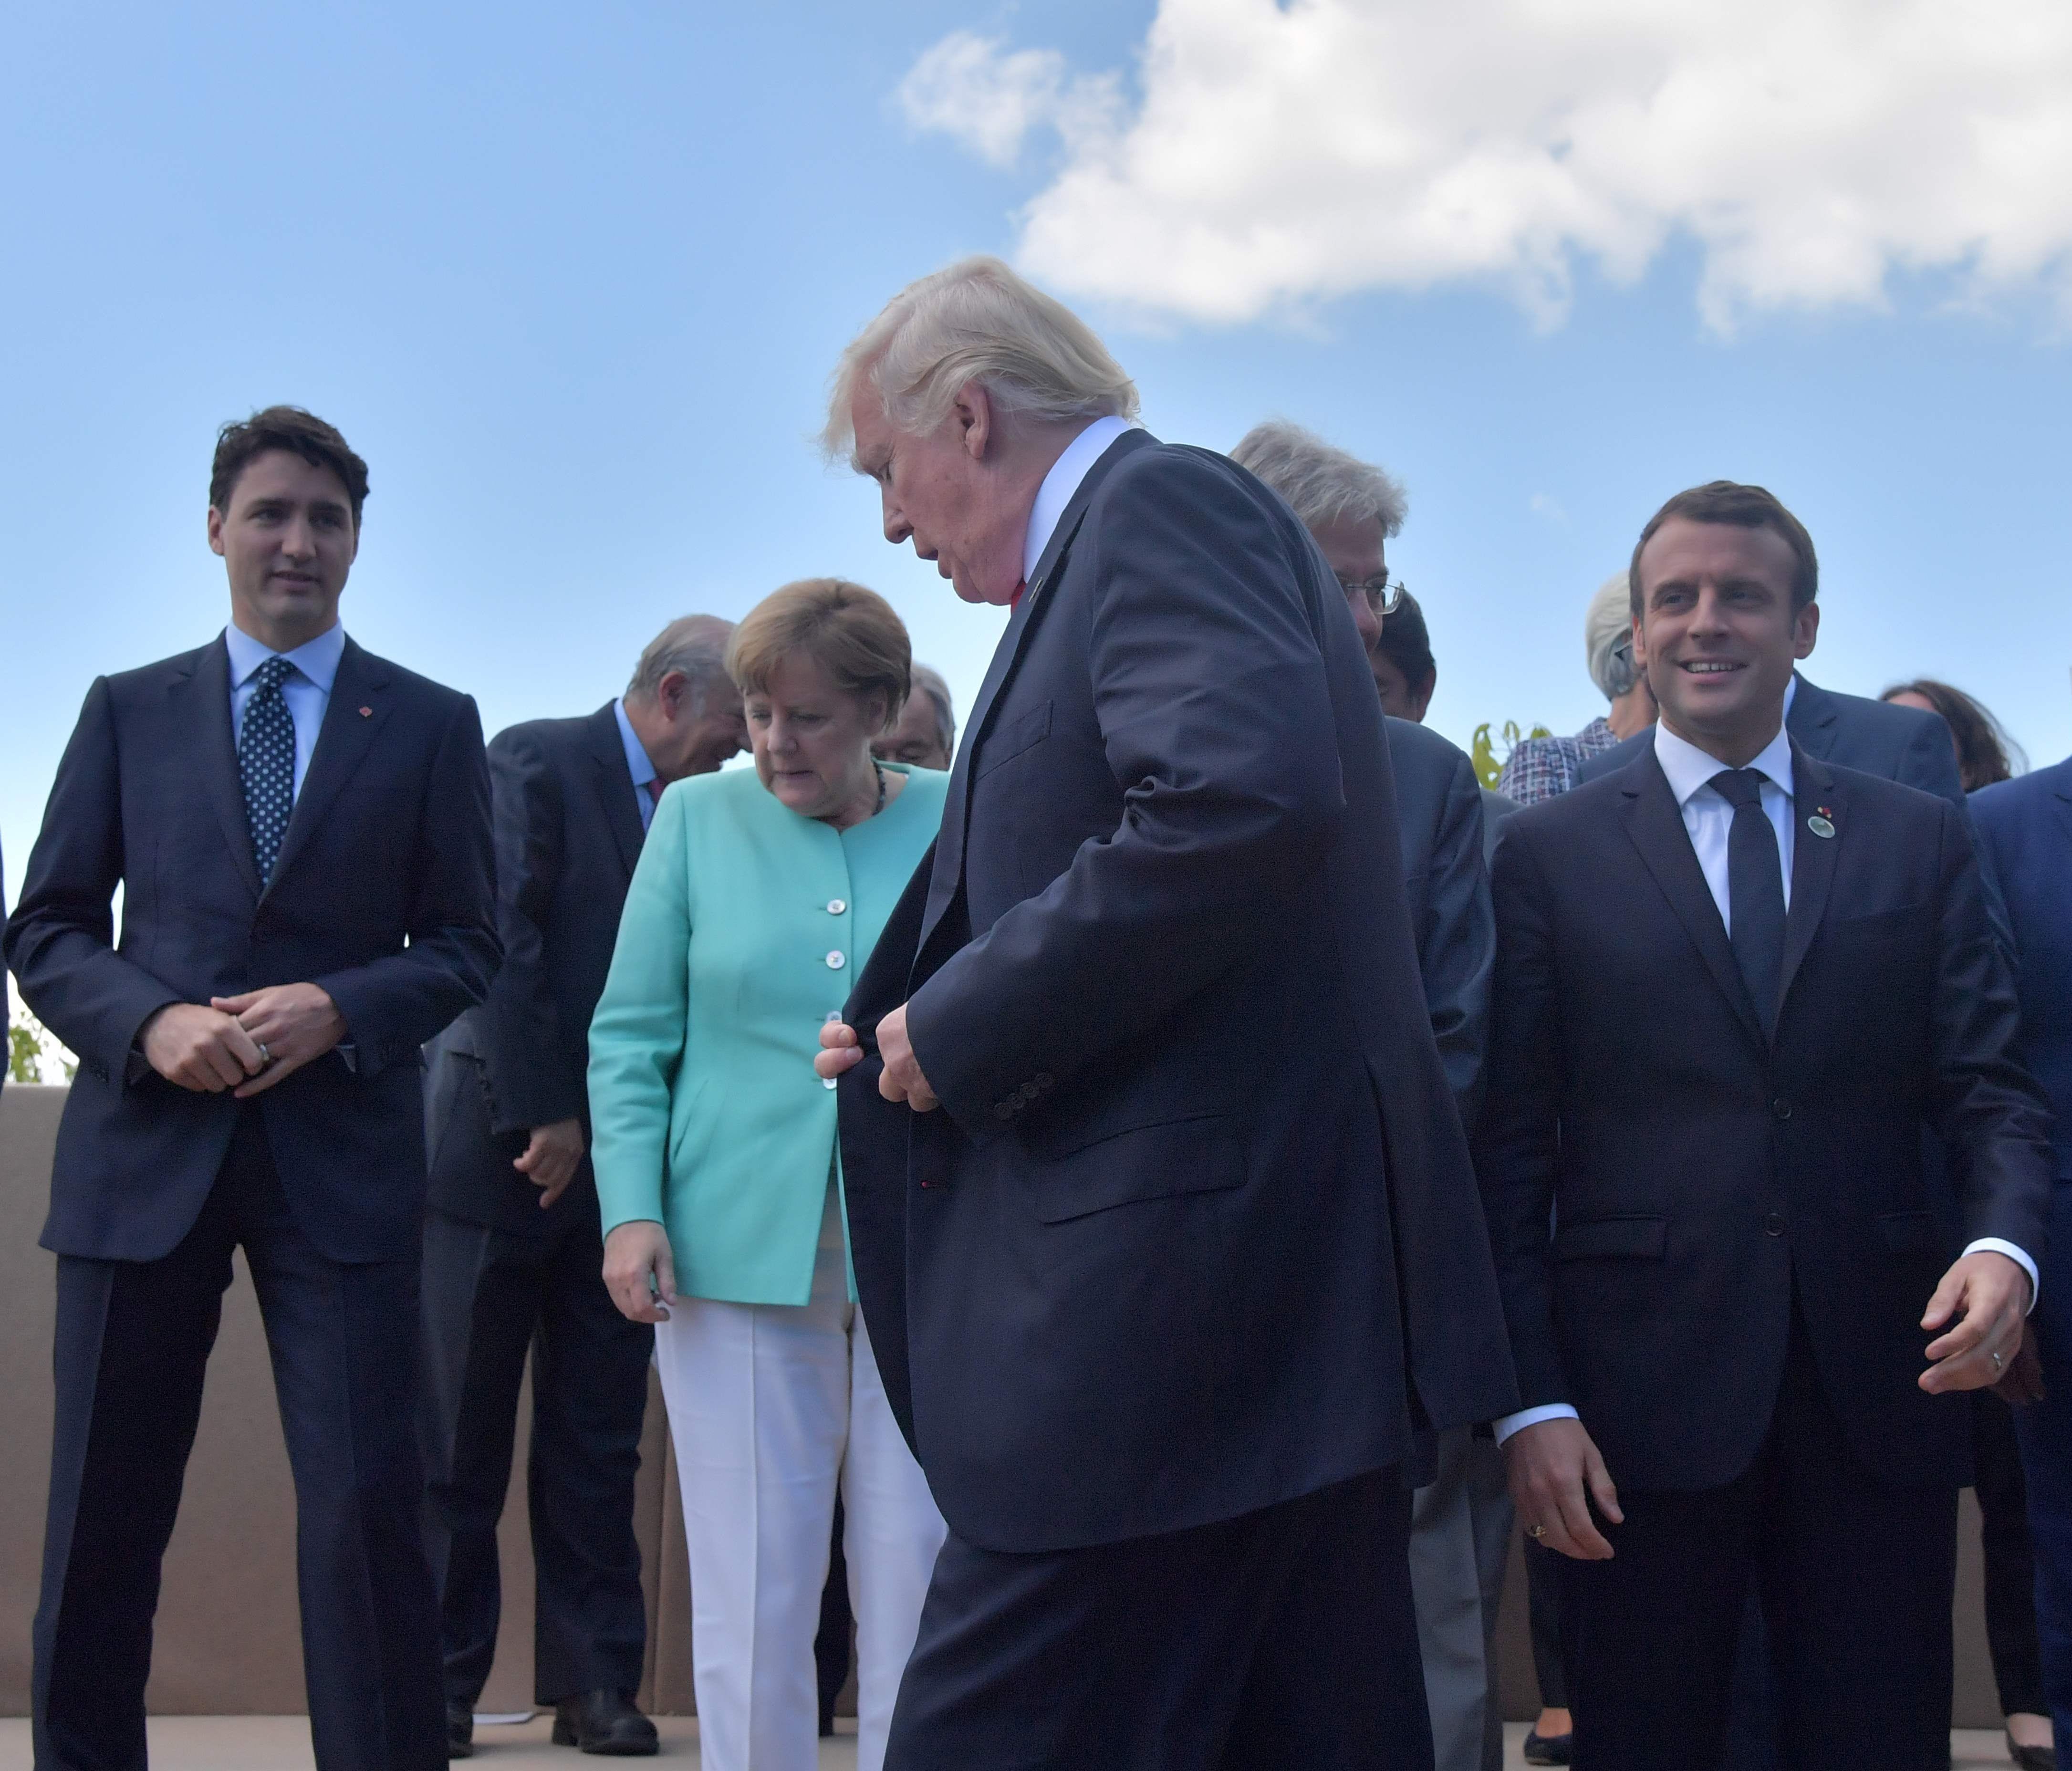 President Trump walks past Canadian Prime Minister Justin Trudeau, German Chancellor Angela Merkel, French President Emmanuel Macron and Niger's President Mahamadou Issoufou at a 